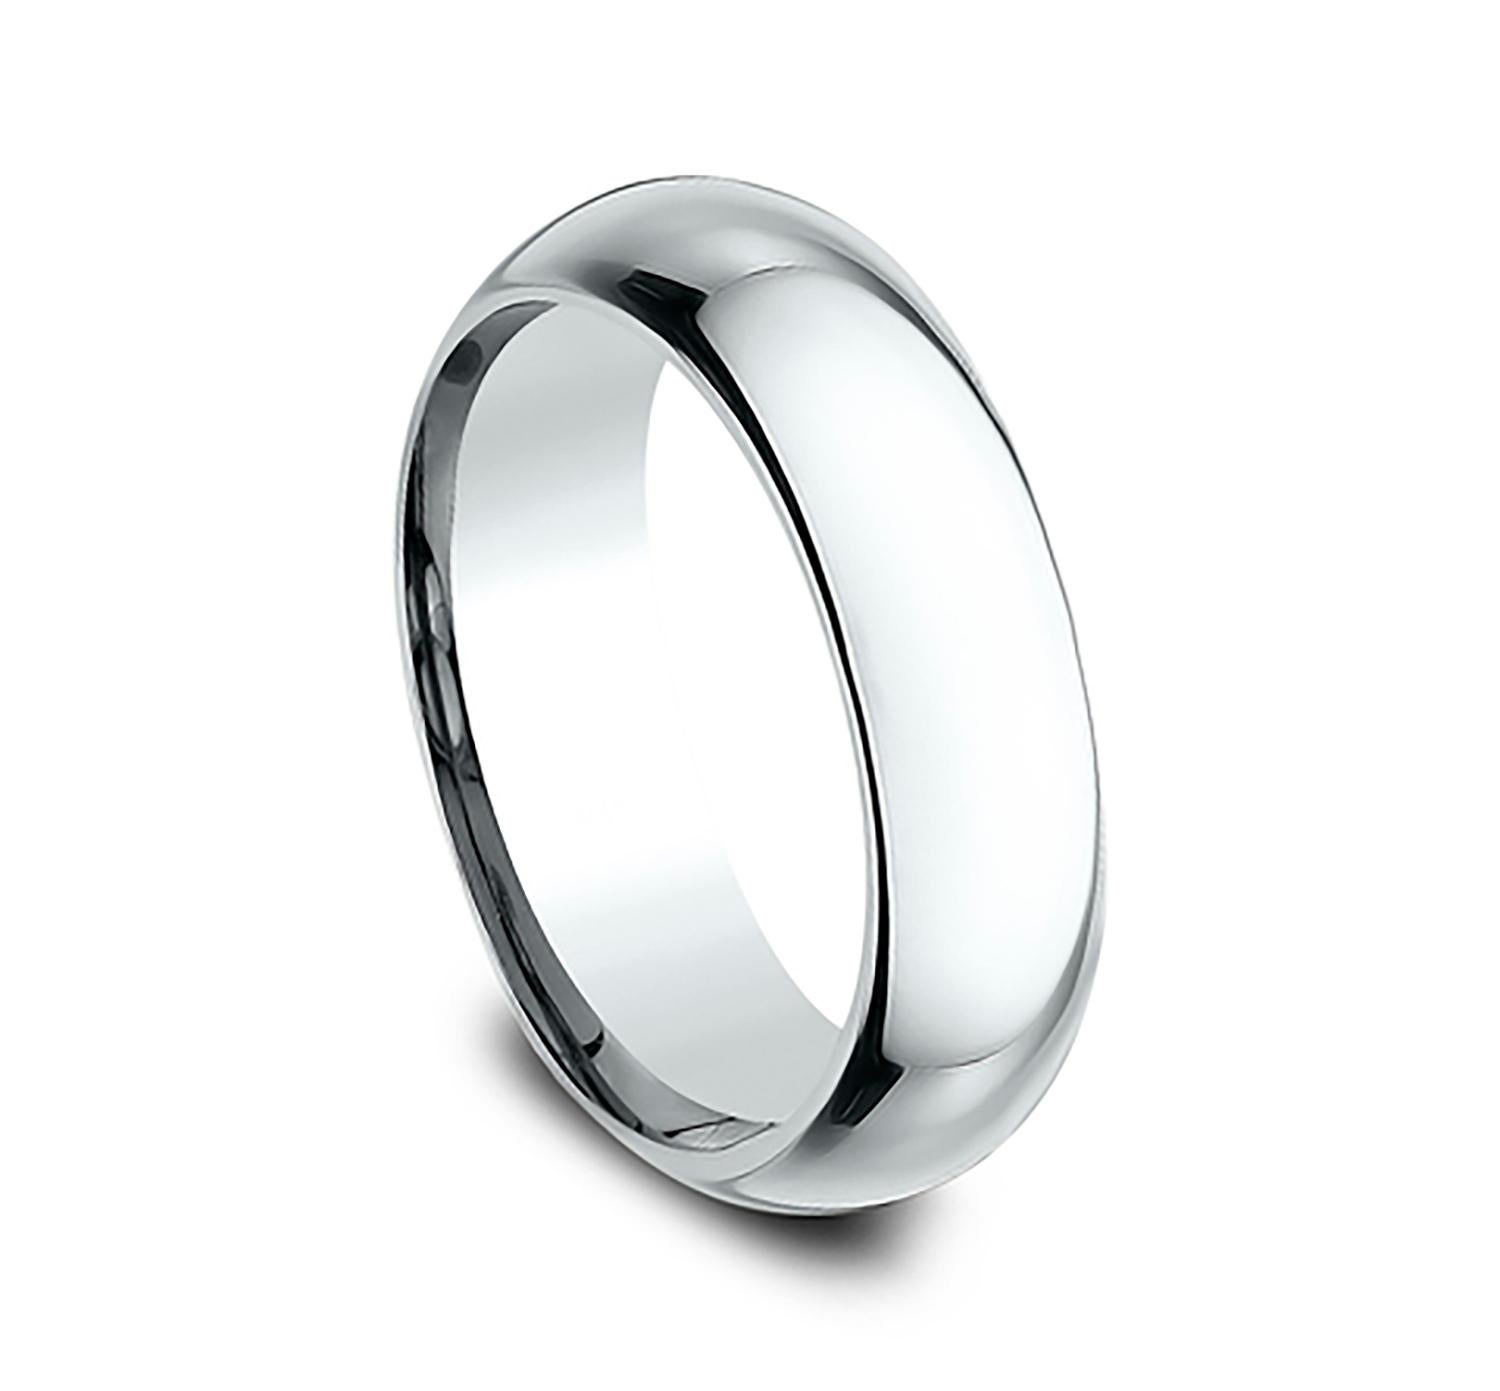 Benchmark wedding band in 14K white gold polished finish. Width 6mm, high dome comfort fit. Custom engraving and finishing available. Size 9 US and resizable upon request. Available in 1/4, 1/2, and 3/4 sizes, for more information please message us